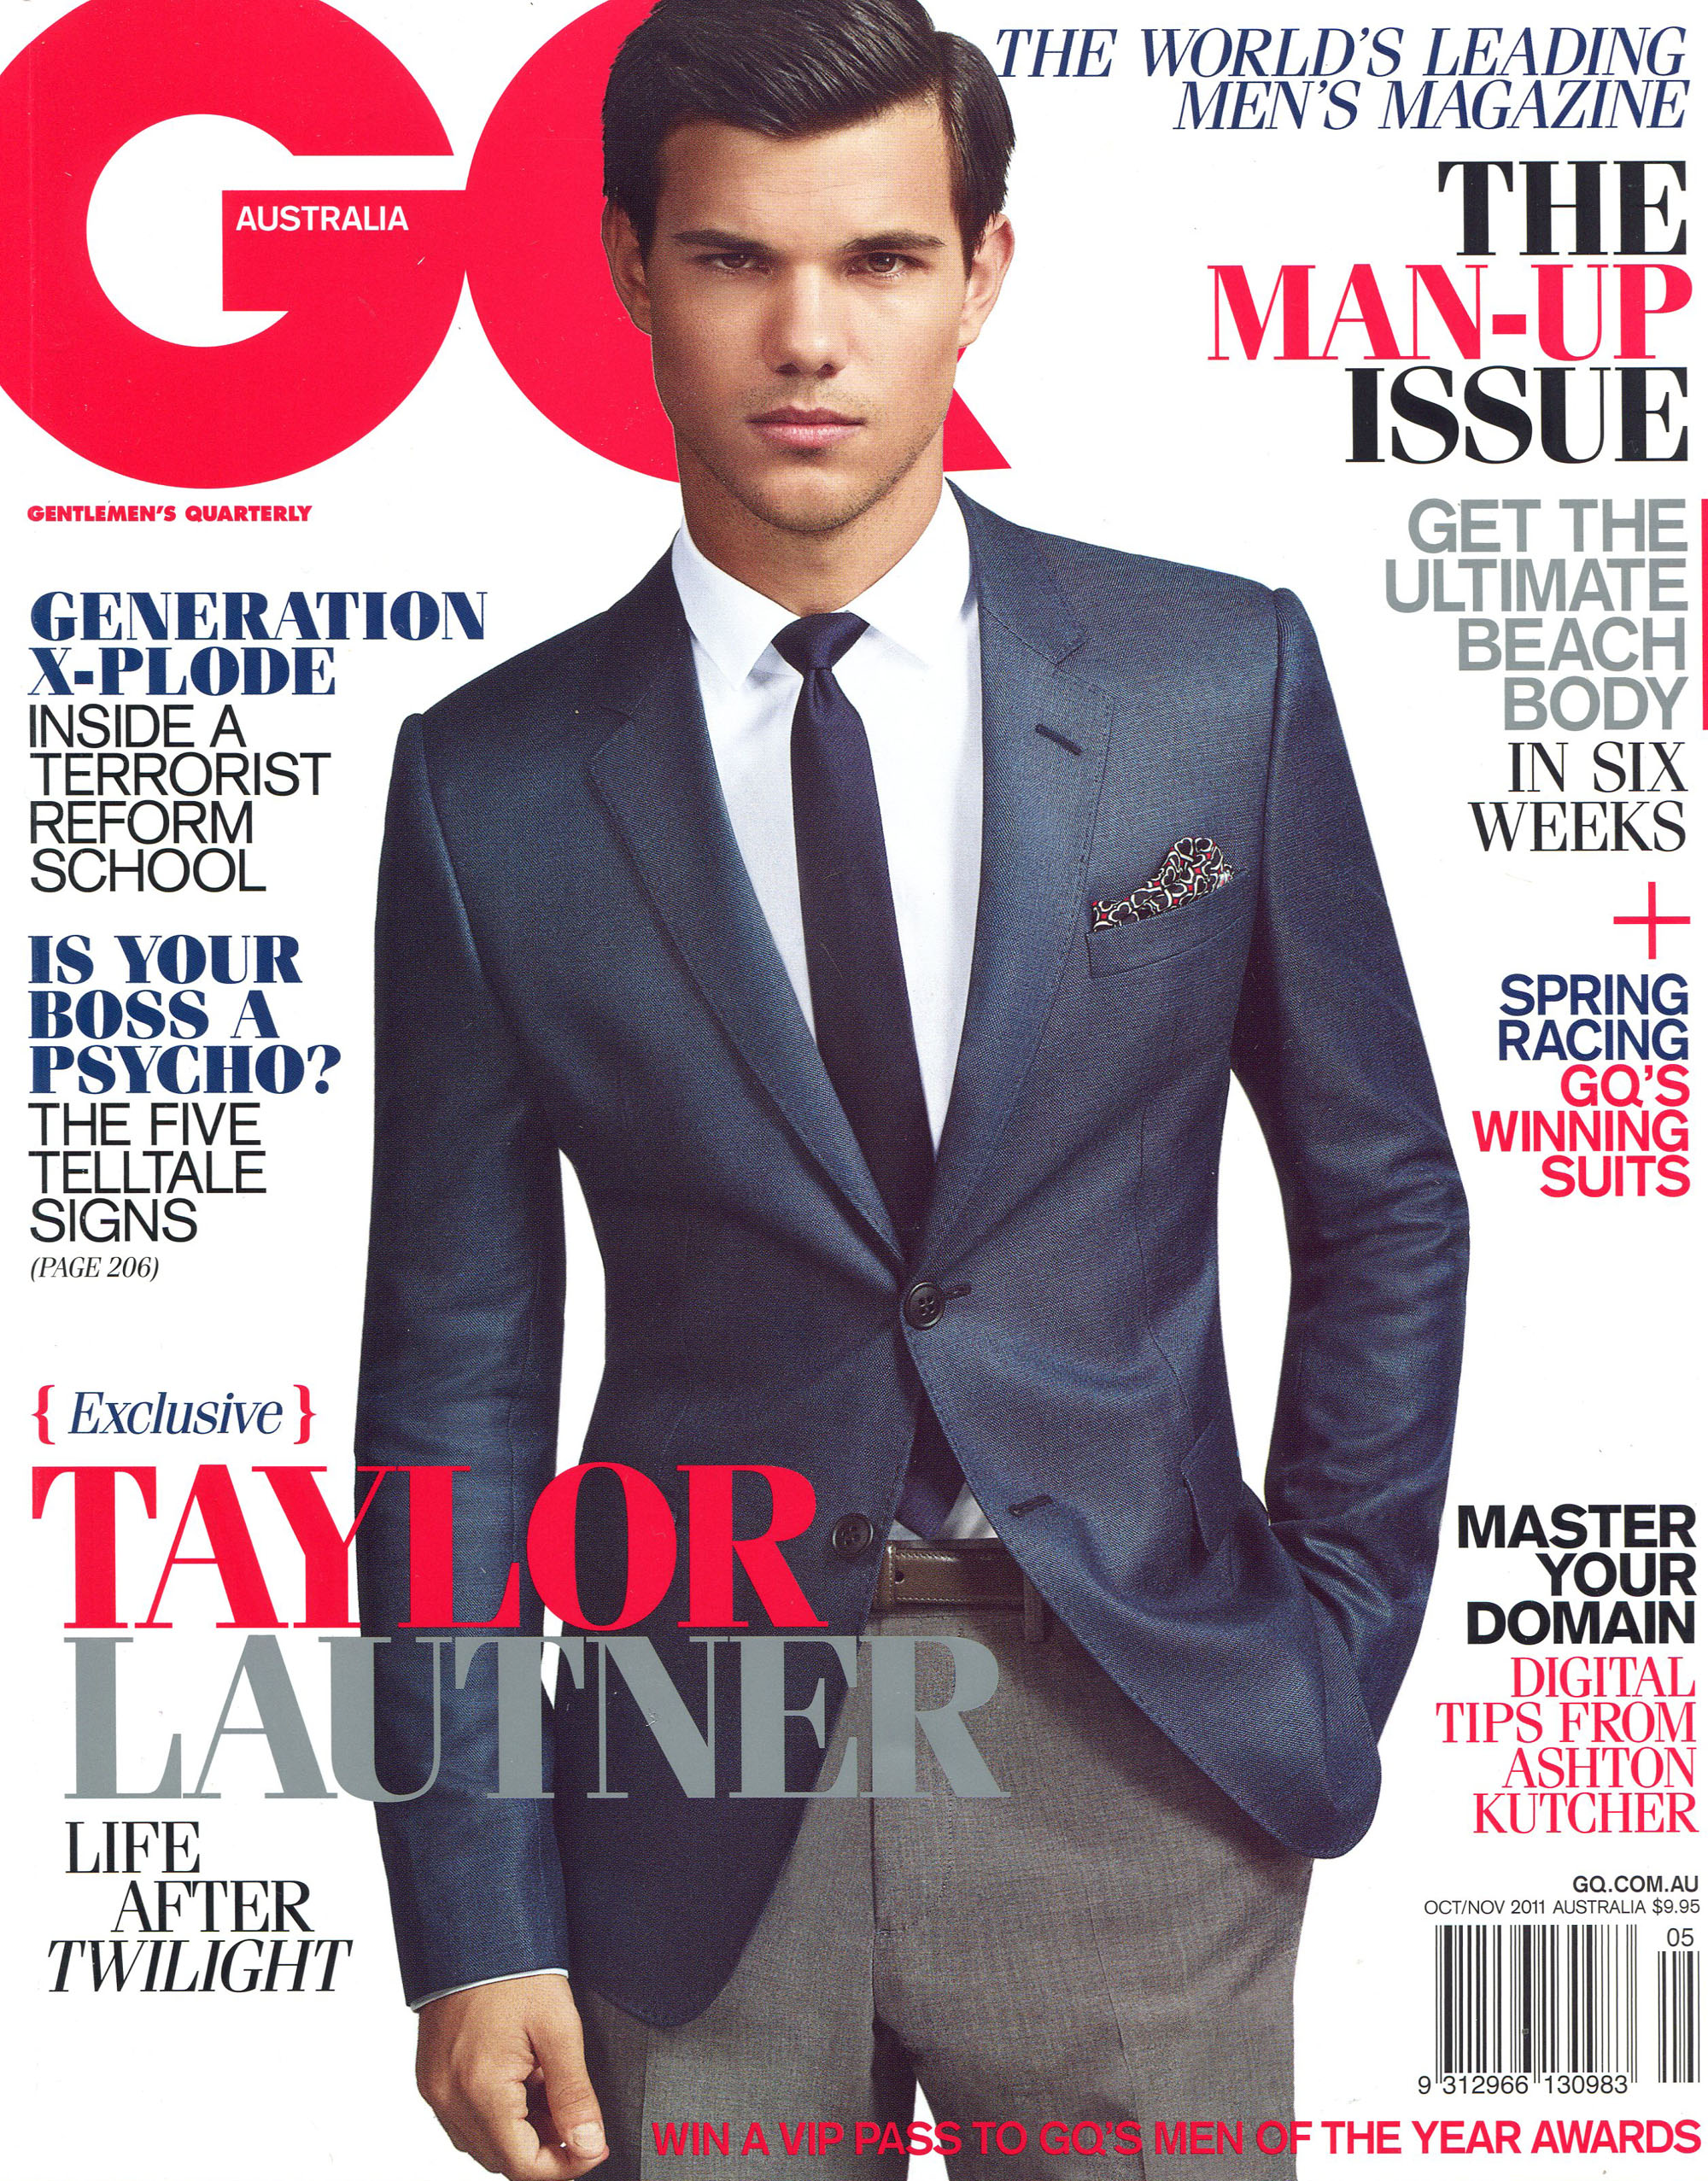 Taylor Lautner on the cover of GQ Australia - Go Fug Yourself